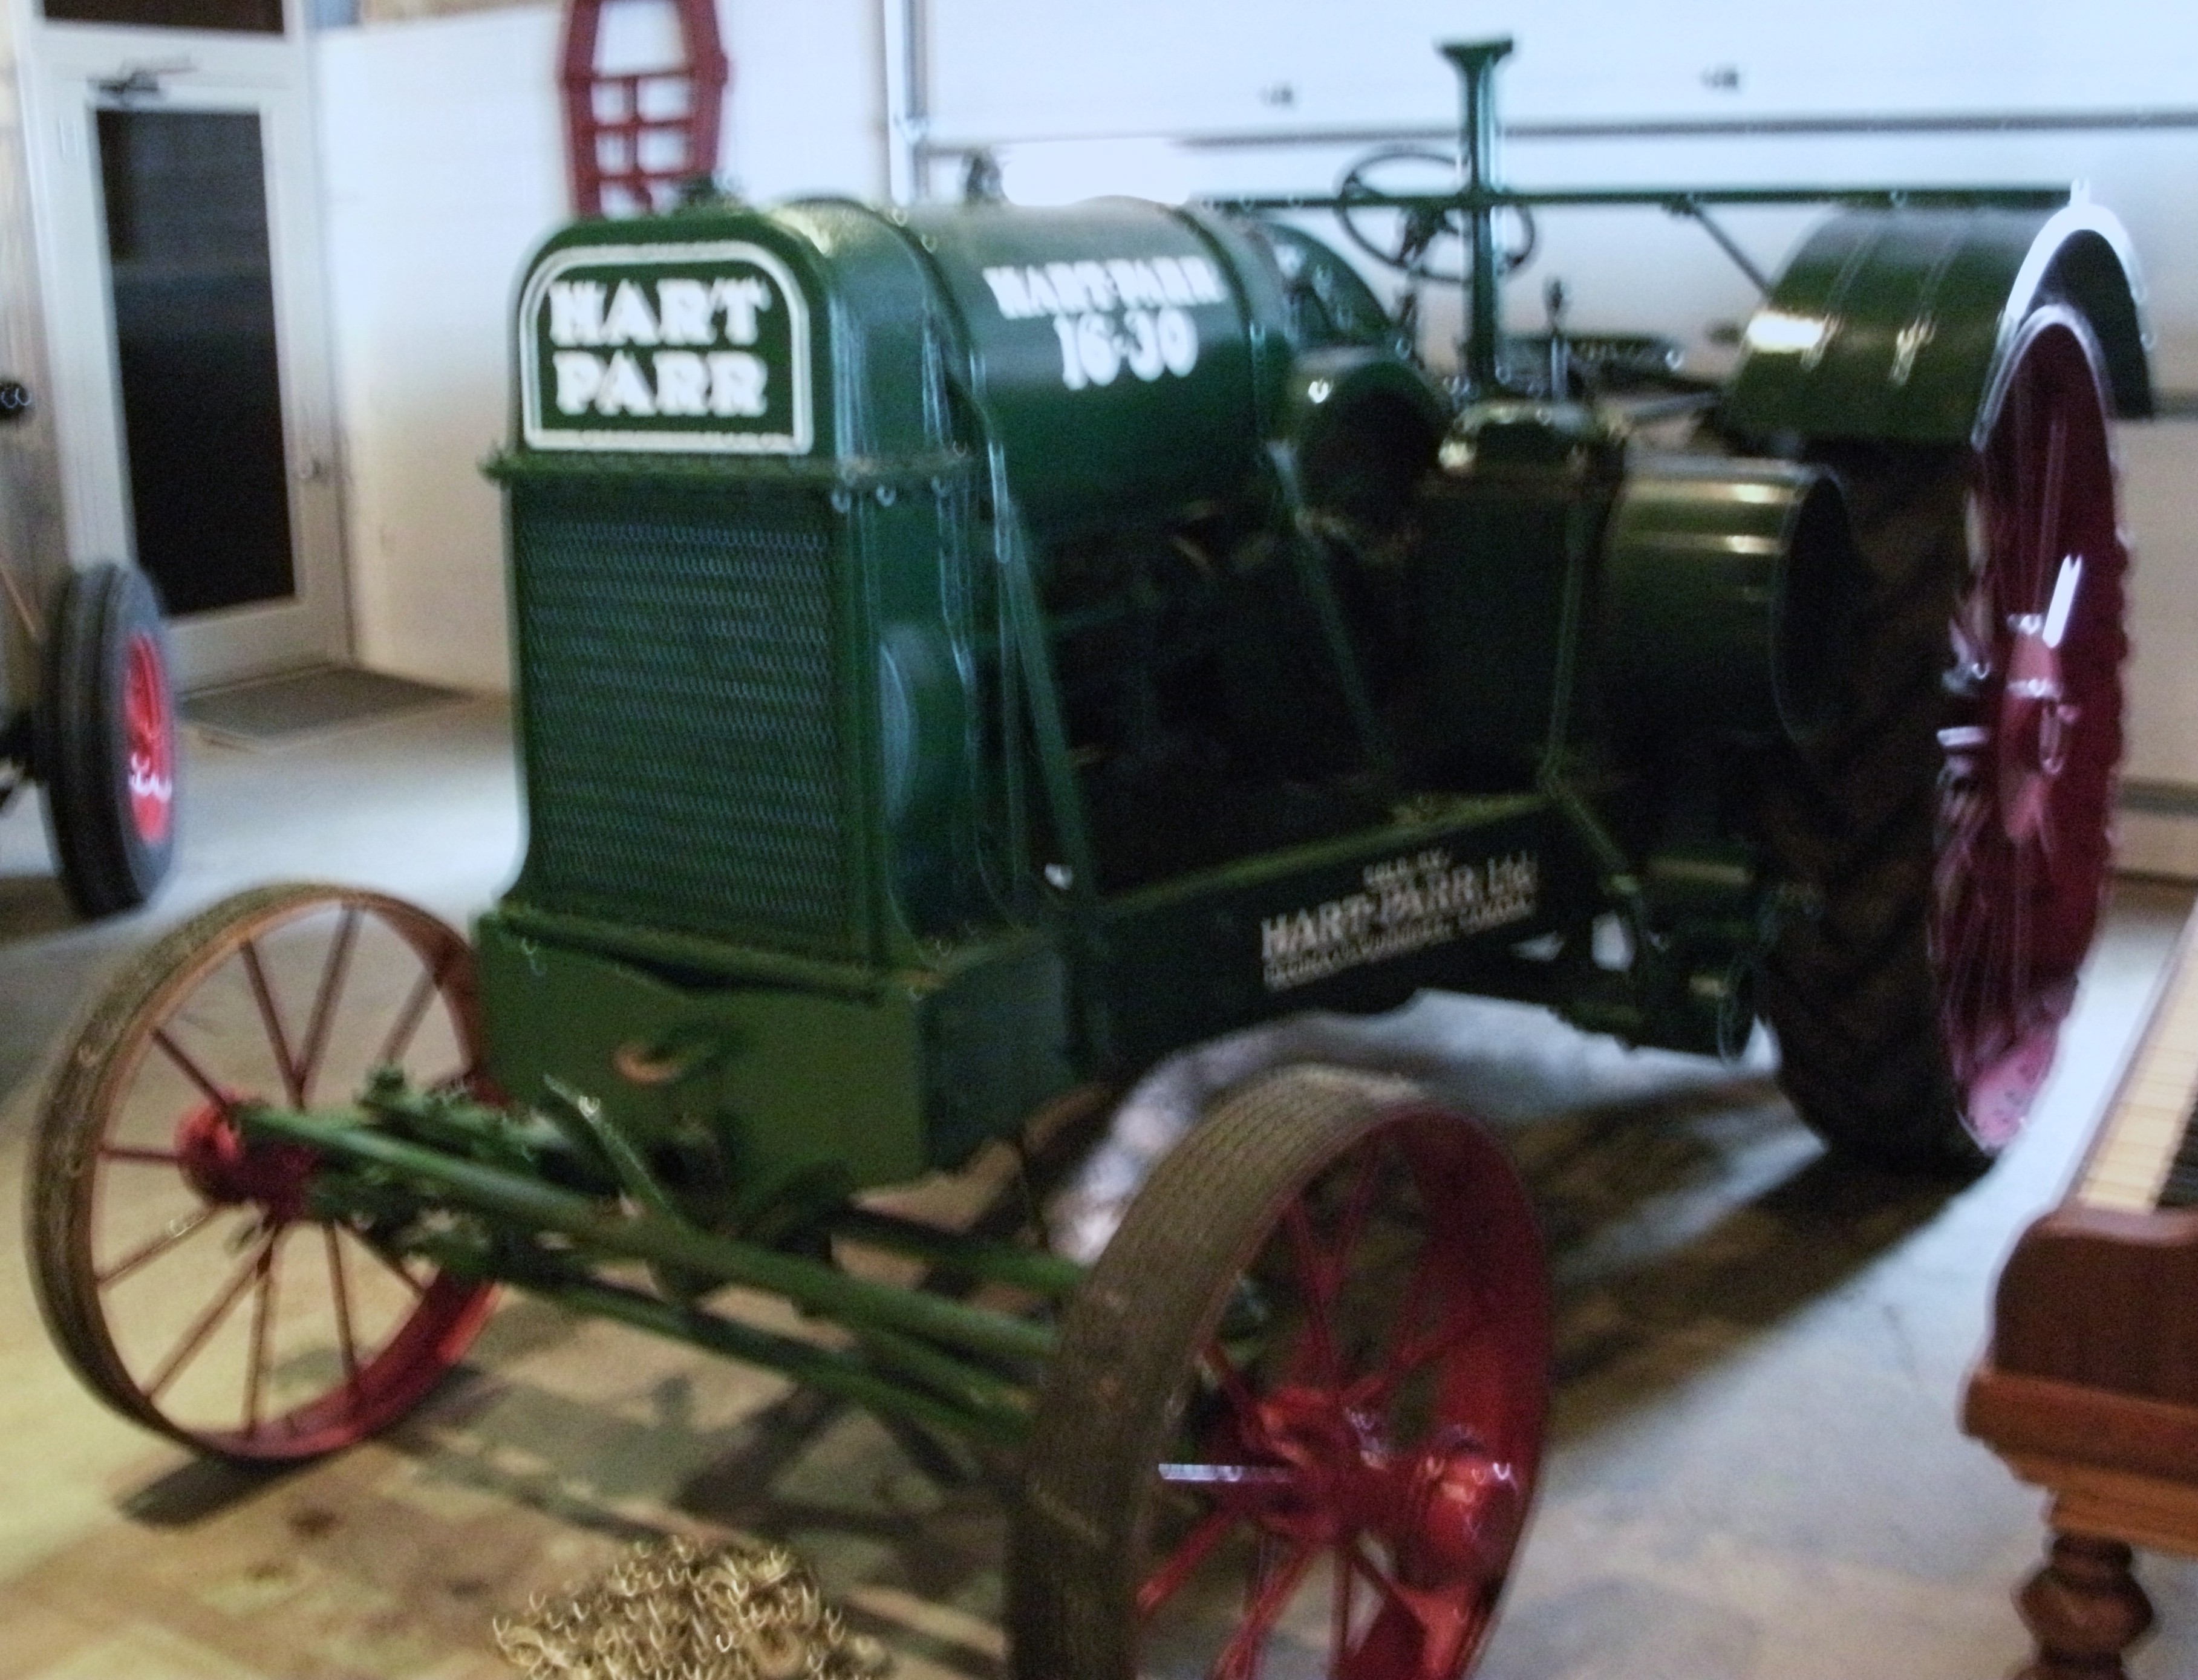 File:HART-PARR tractor 16-30 pic2.JPG - Wikimedia Commons